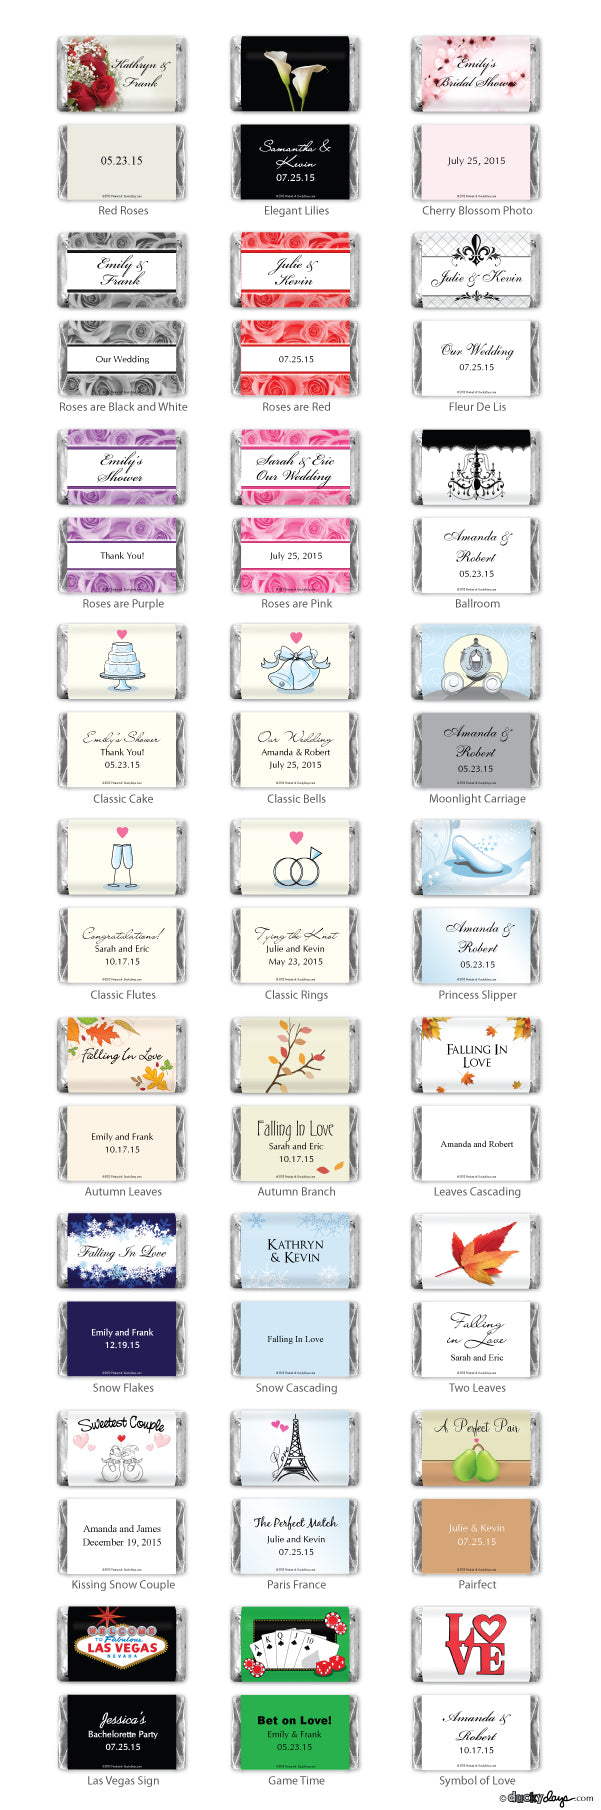 Personalized Hershey's Mini's (Many Designs Available) - Alternate Image 3 | My Wedding Favors